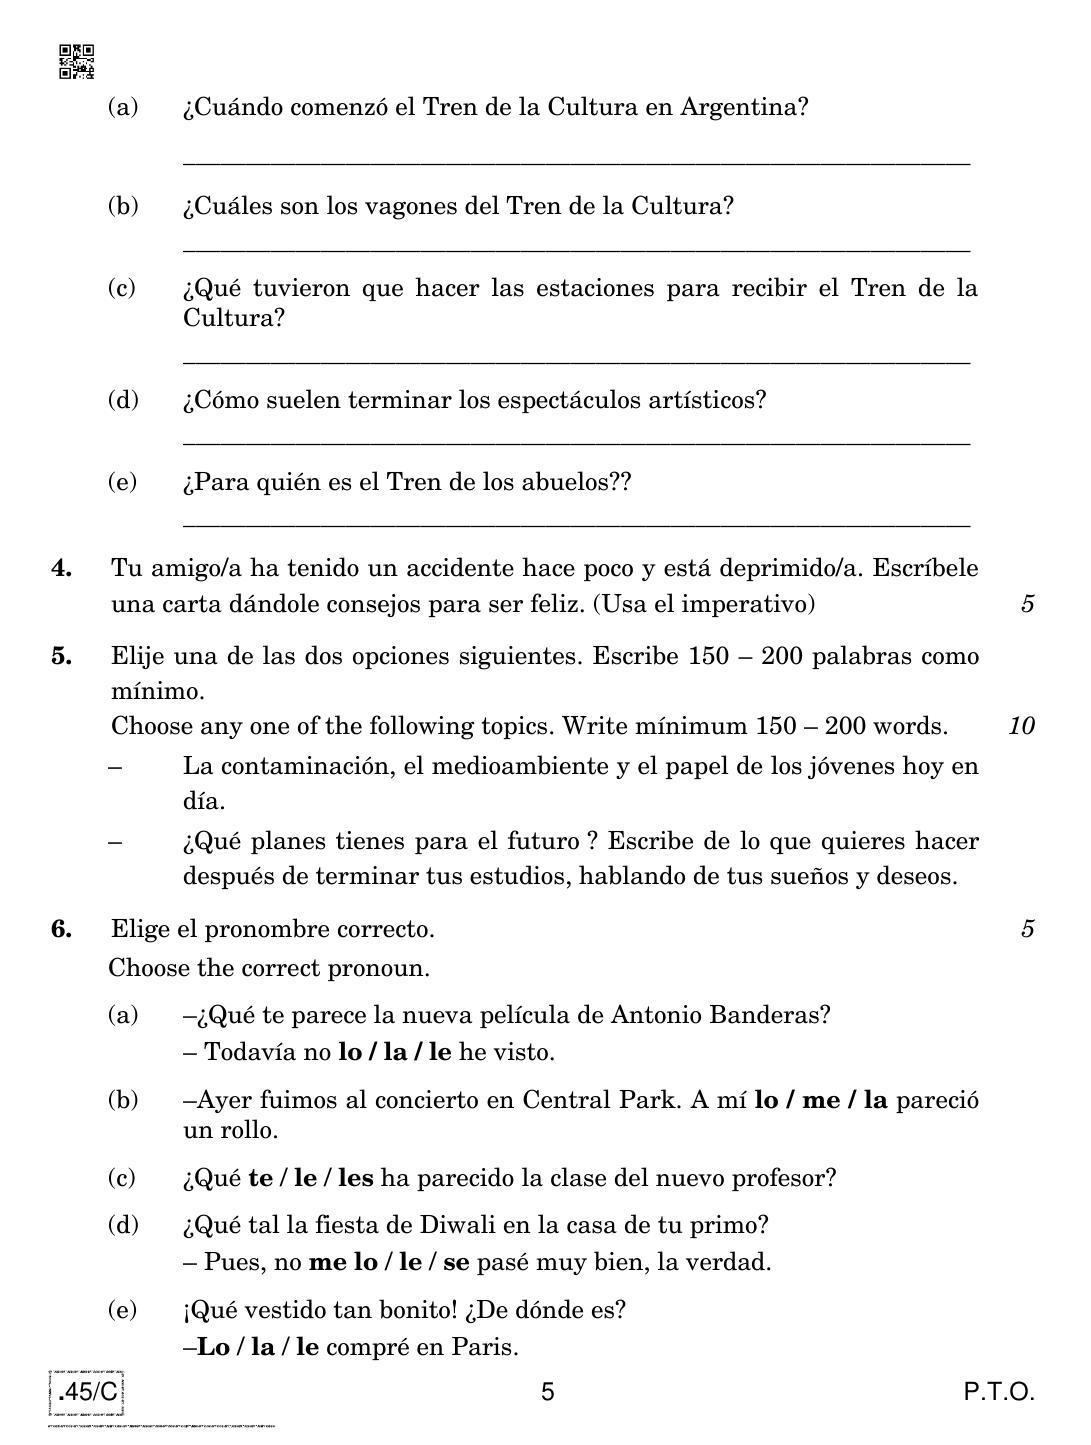 CBSE Class 10 Spanish 2020 Compartment Question Paper - Page 5